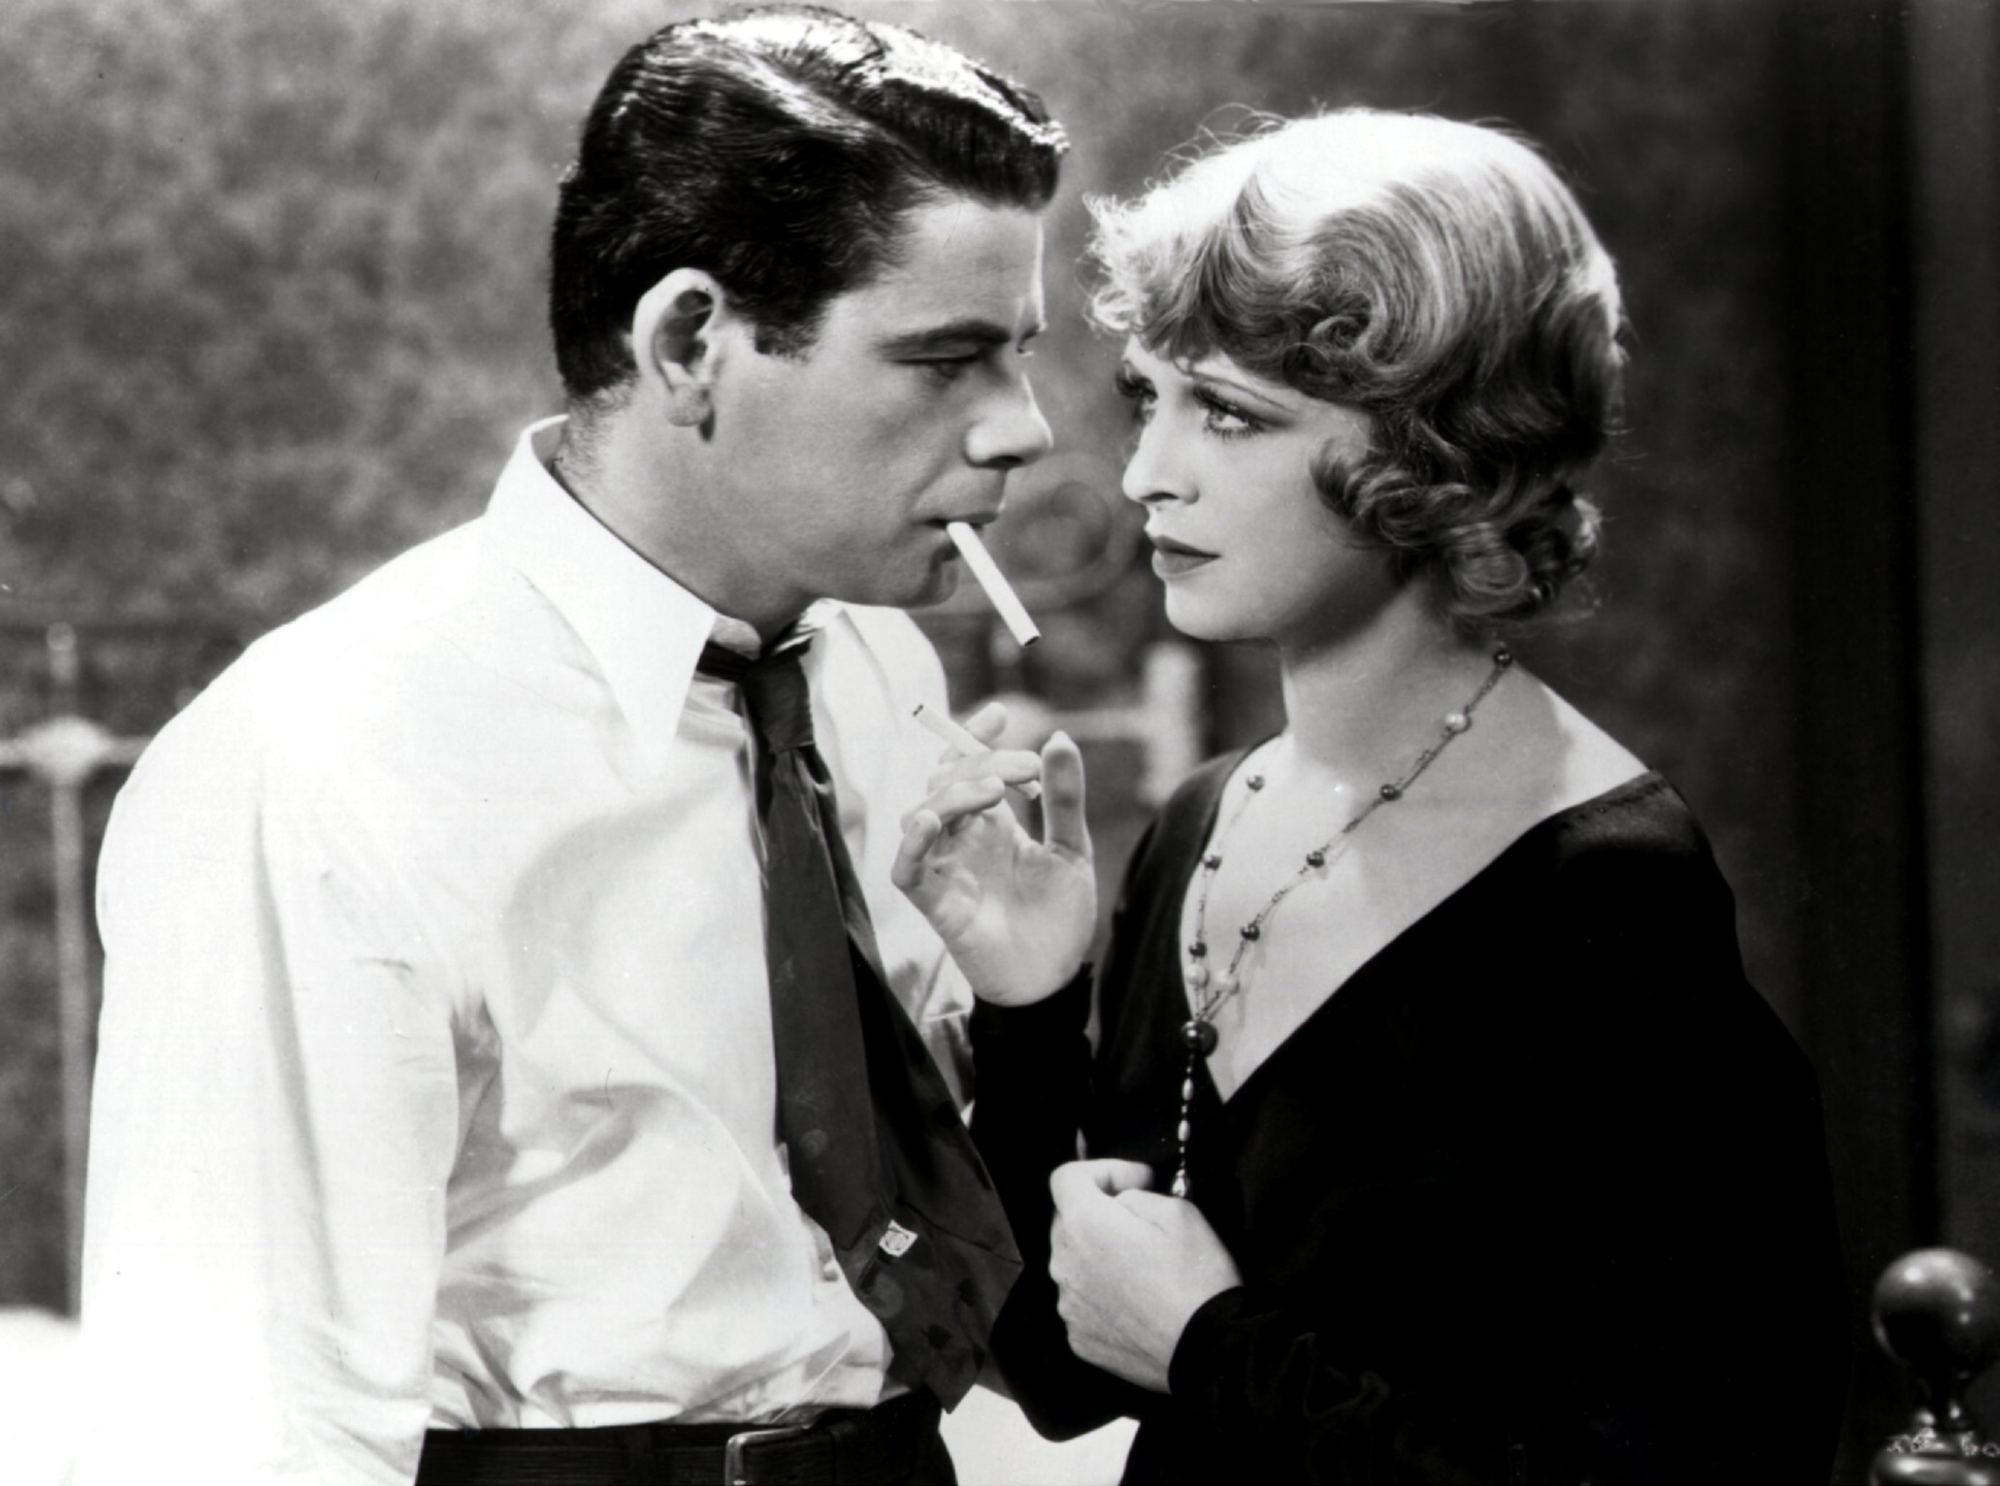 'I Am a Fugitive from a Chain Gang' Paul Muni as James Allen and Noel Francis as Linda. He's wearing a tie and dress shirt, with a cigarette in his mouth. She's looking into his eyes, wearing a necklace and a black dress.